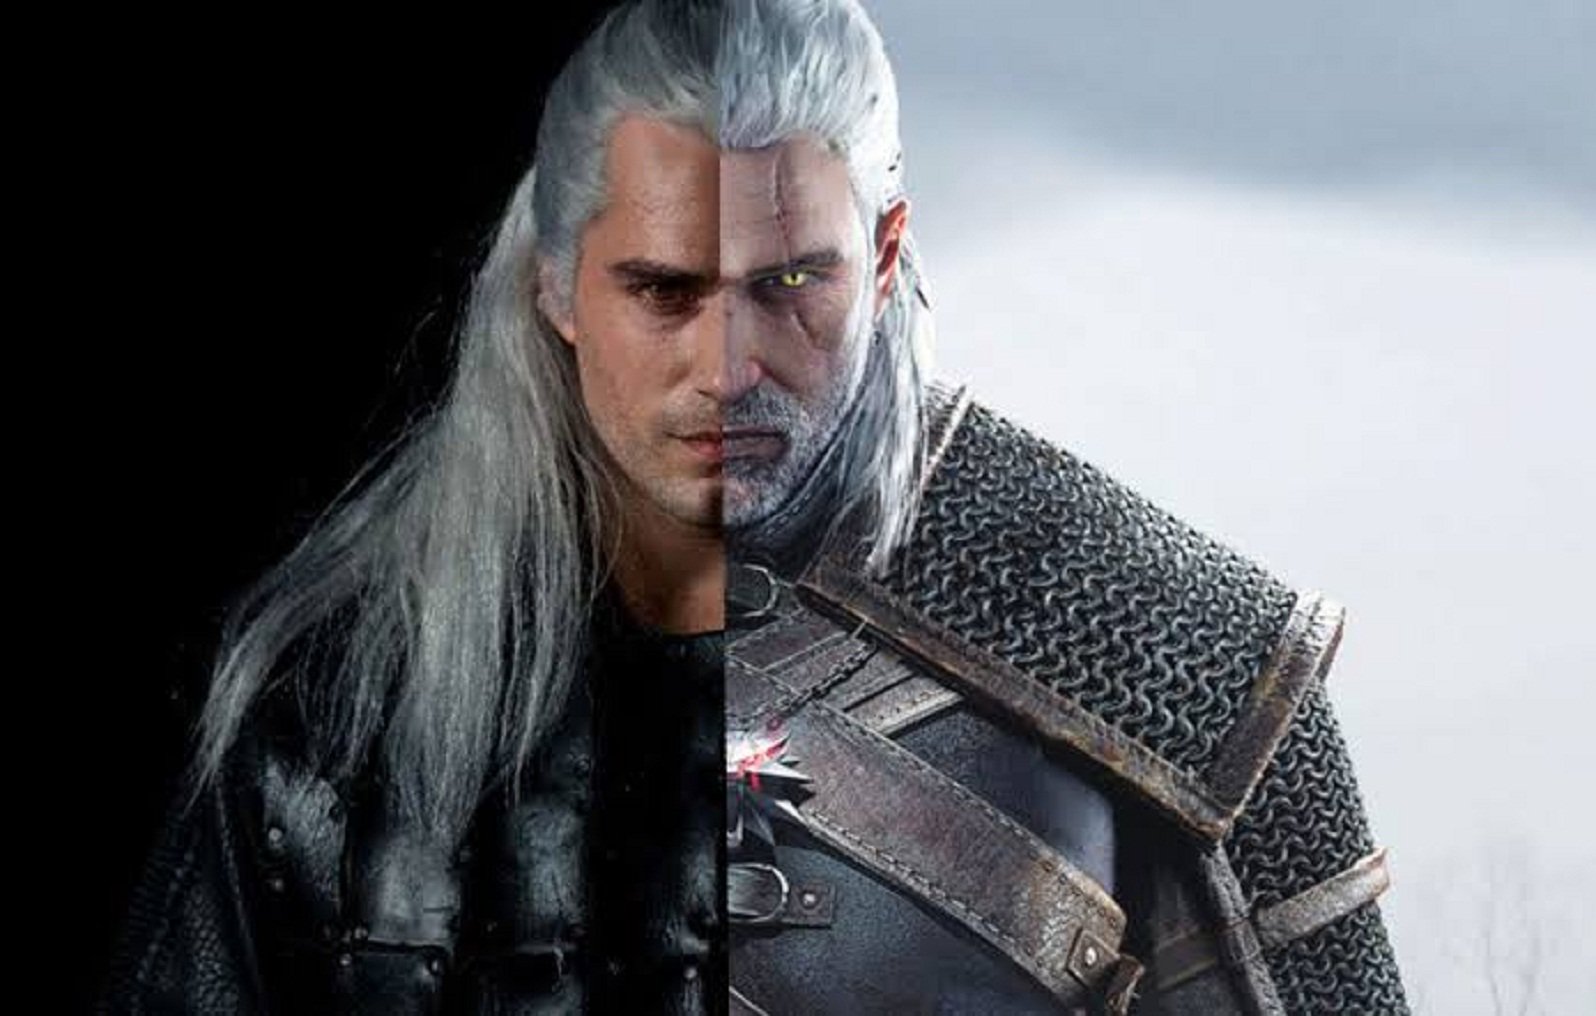 CD Projekt Group Officially Surpasses Ubisoft As The Most Valuable European Video Game Company